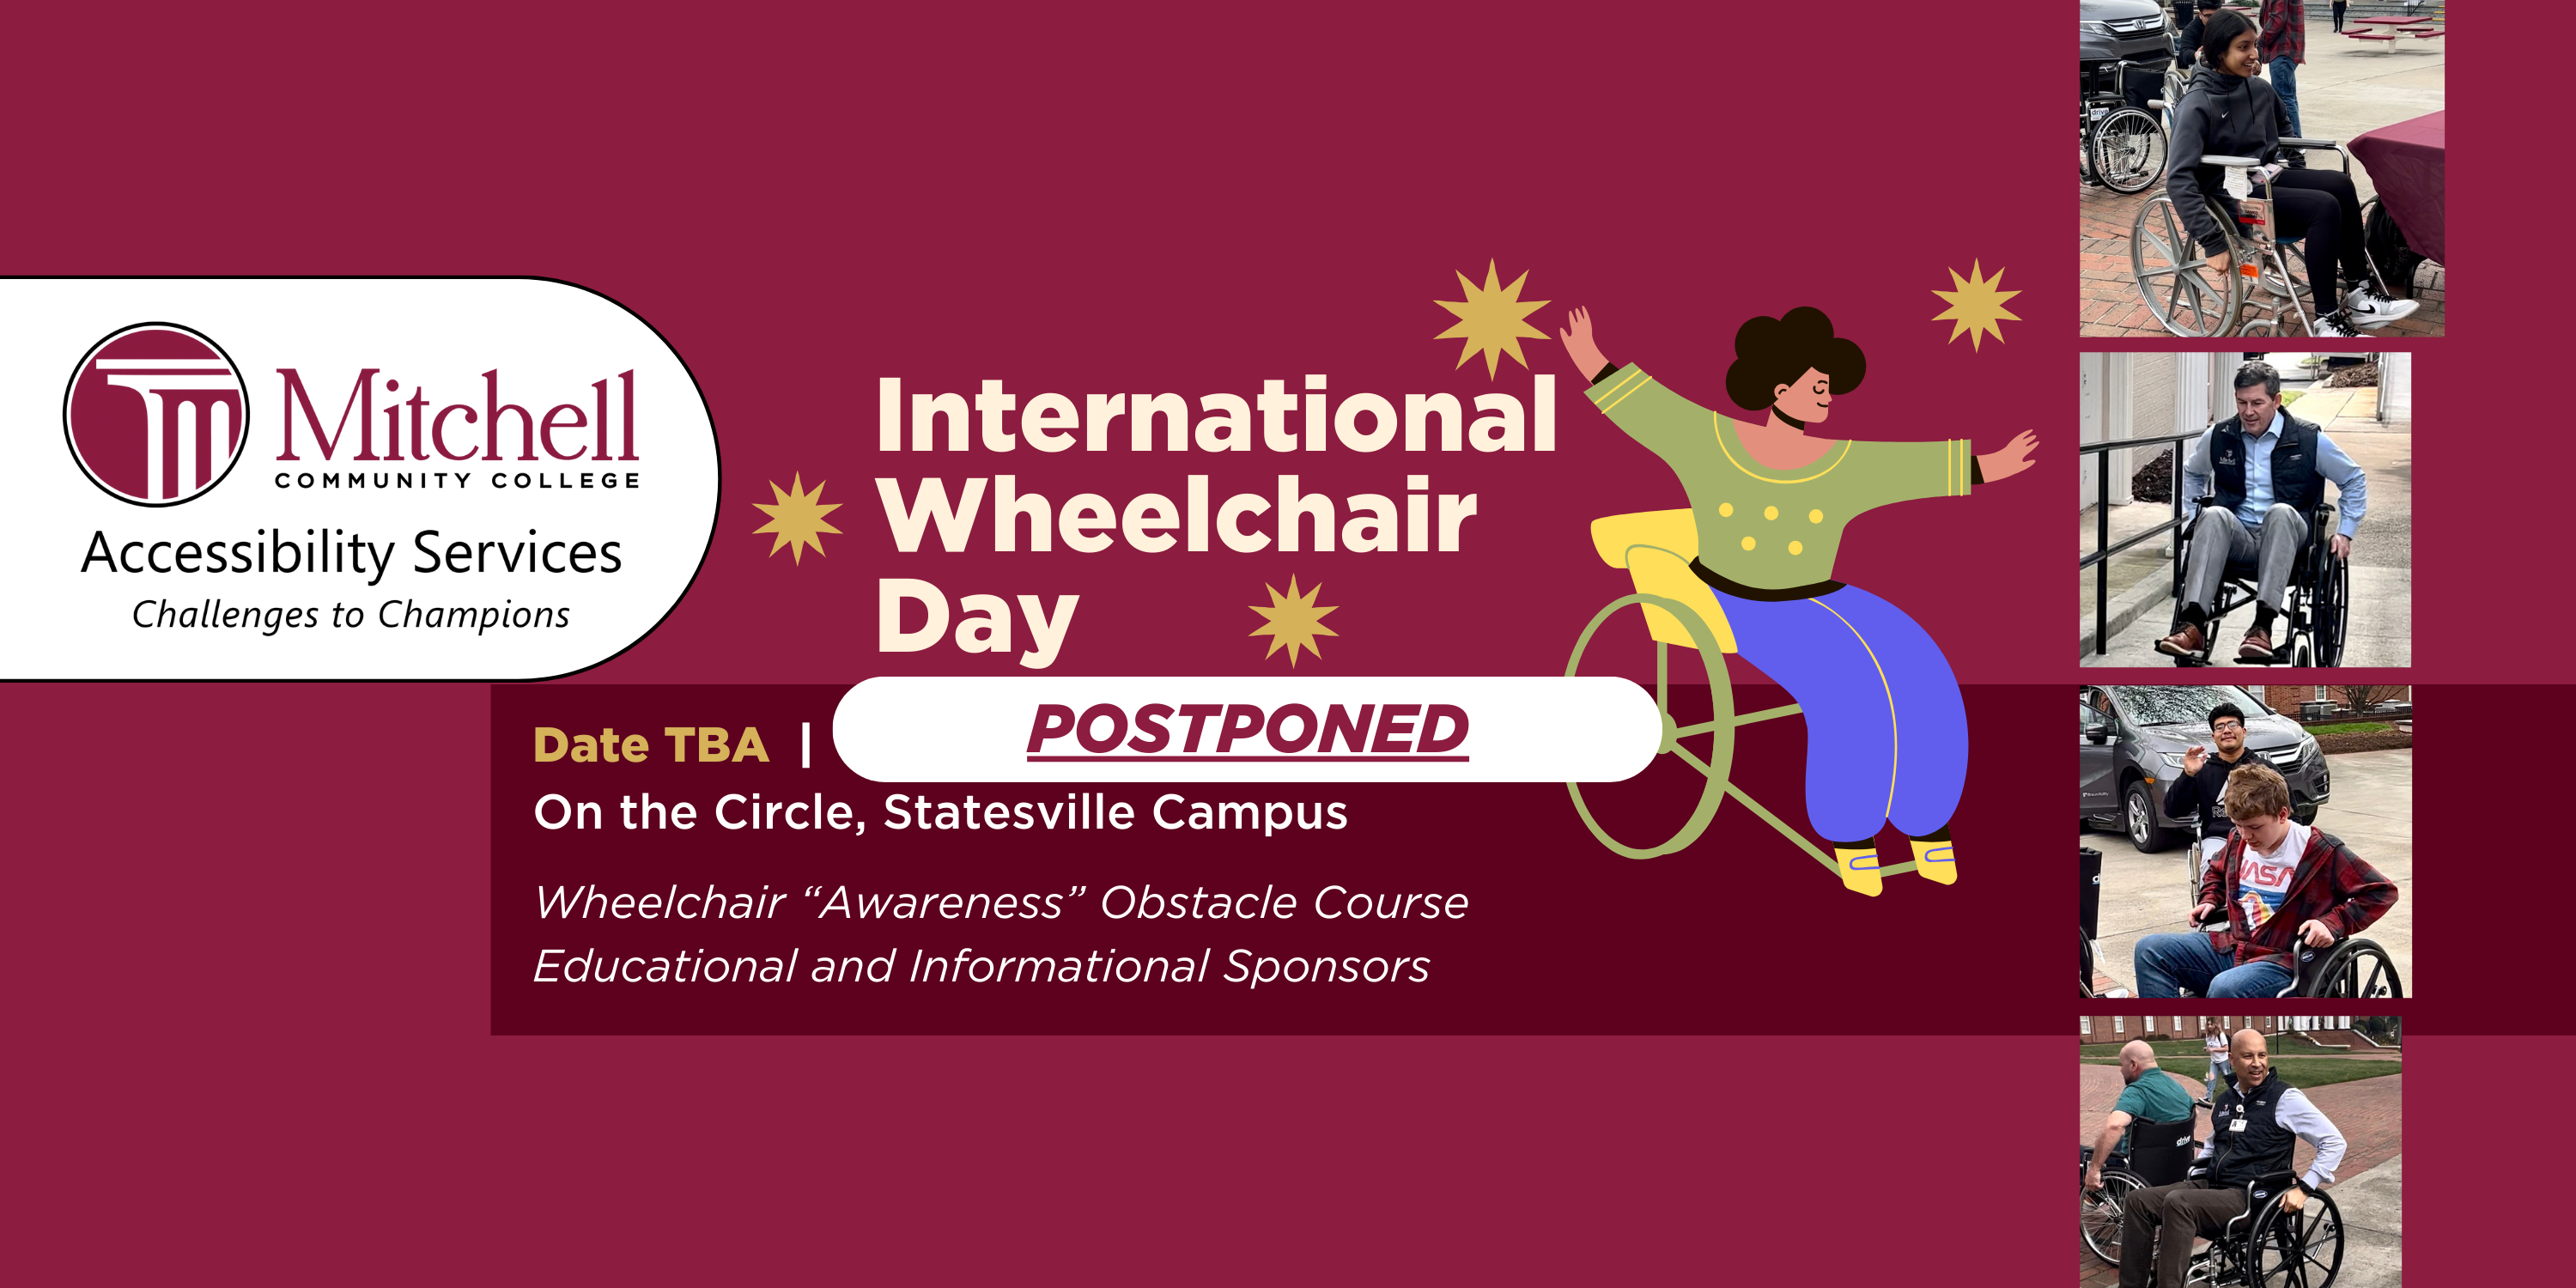 Banner that reads "International Wheelchair Day | Save the date! | March 1, 10 a.m. - 1 p.m. | On the Circle, Statesville Campus. - Wheelchair "Awareness Obstacle Course Educational and Informational Sponsors".